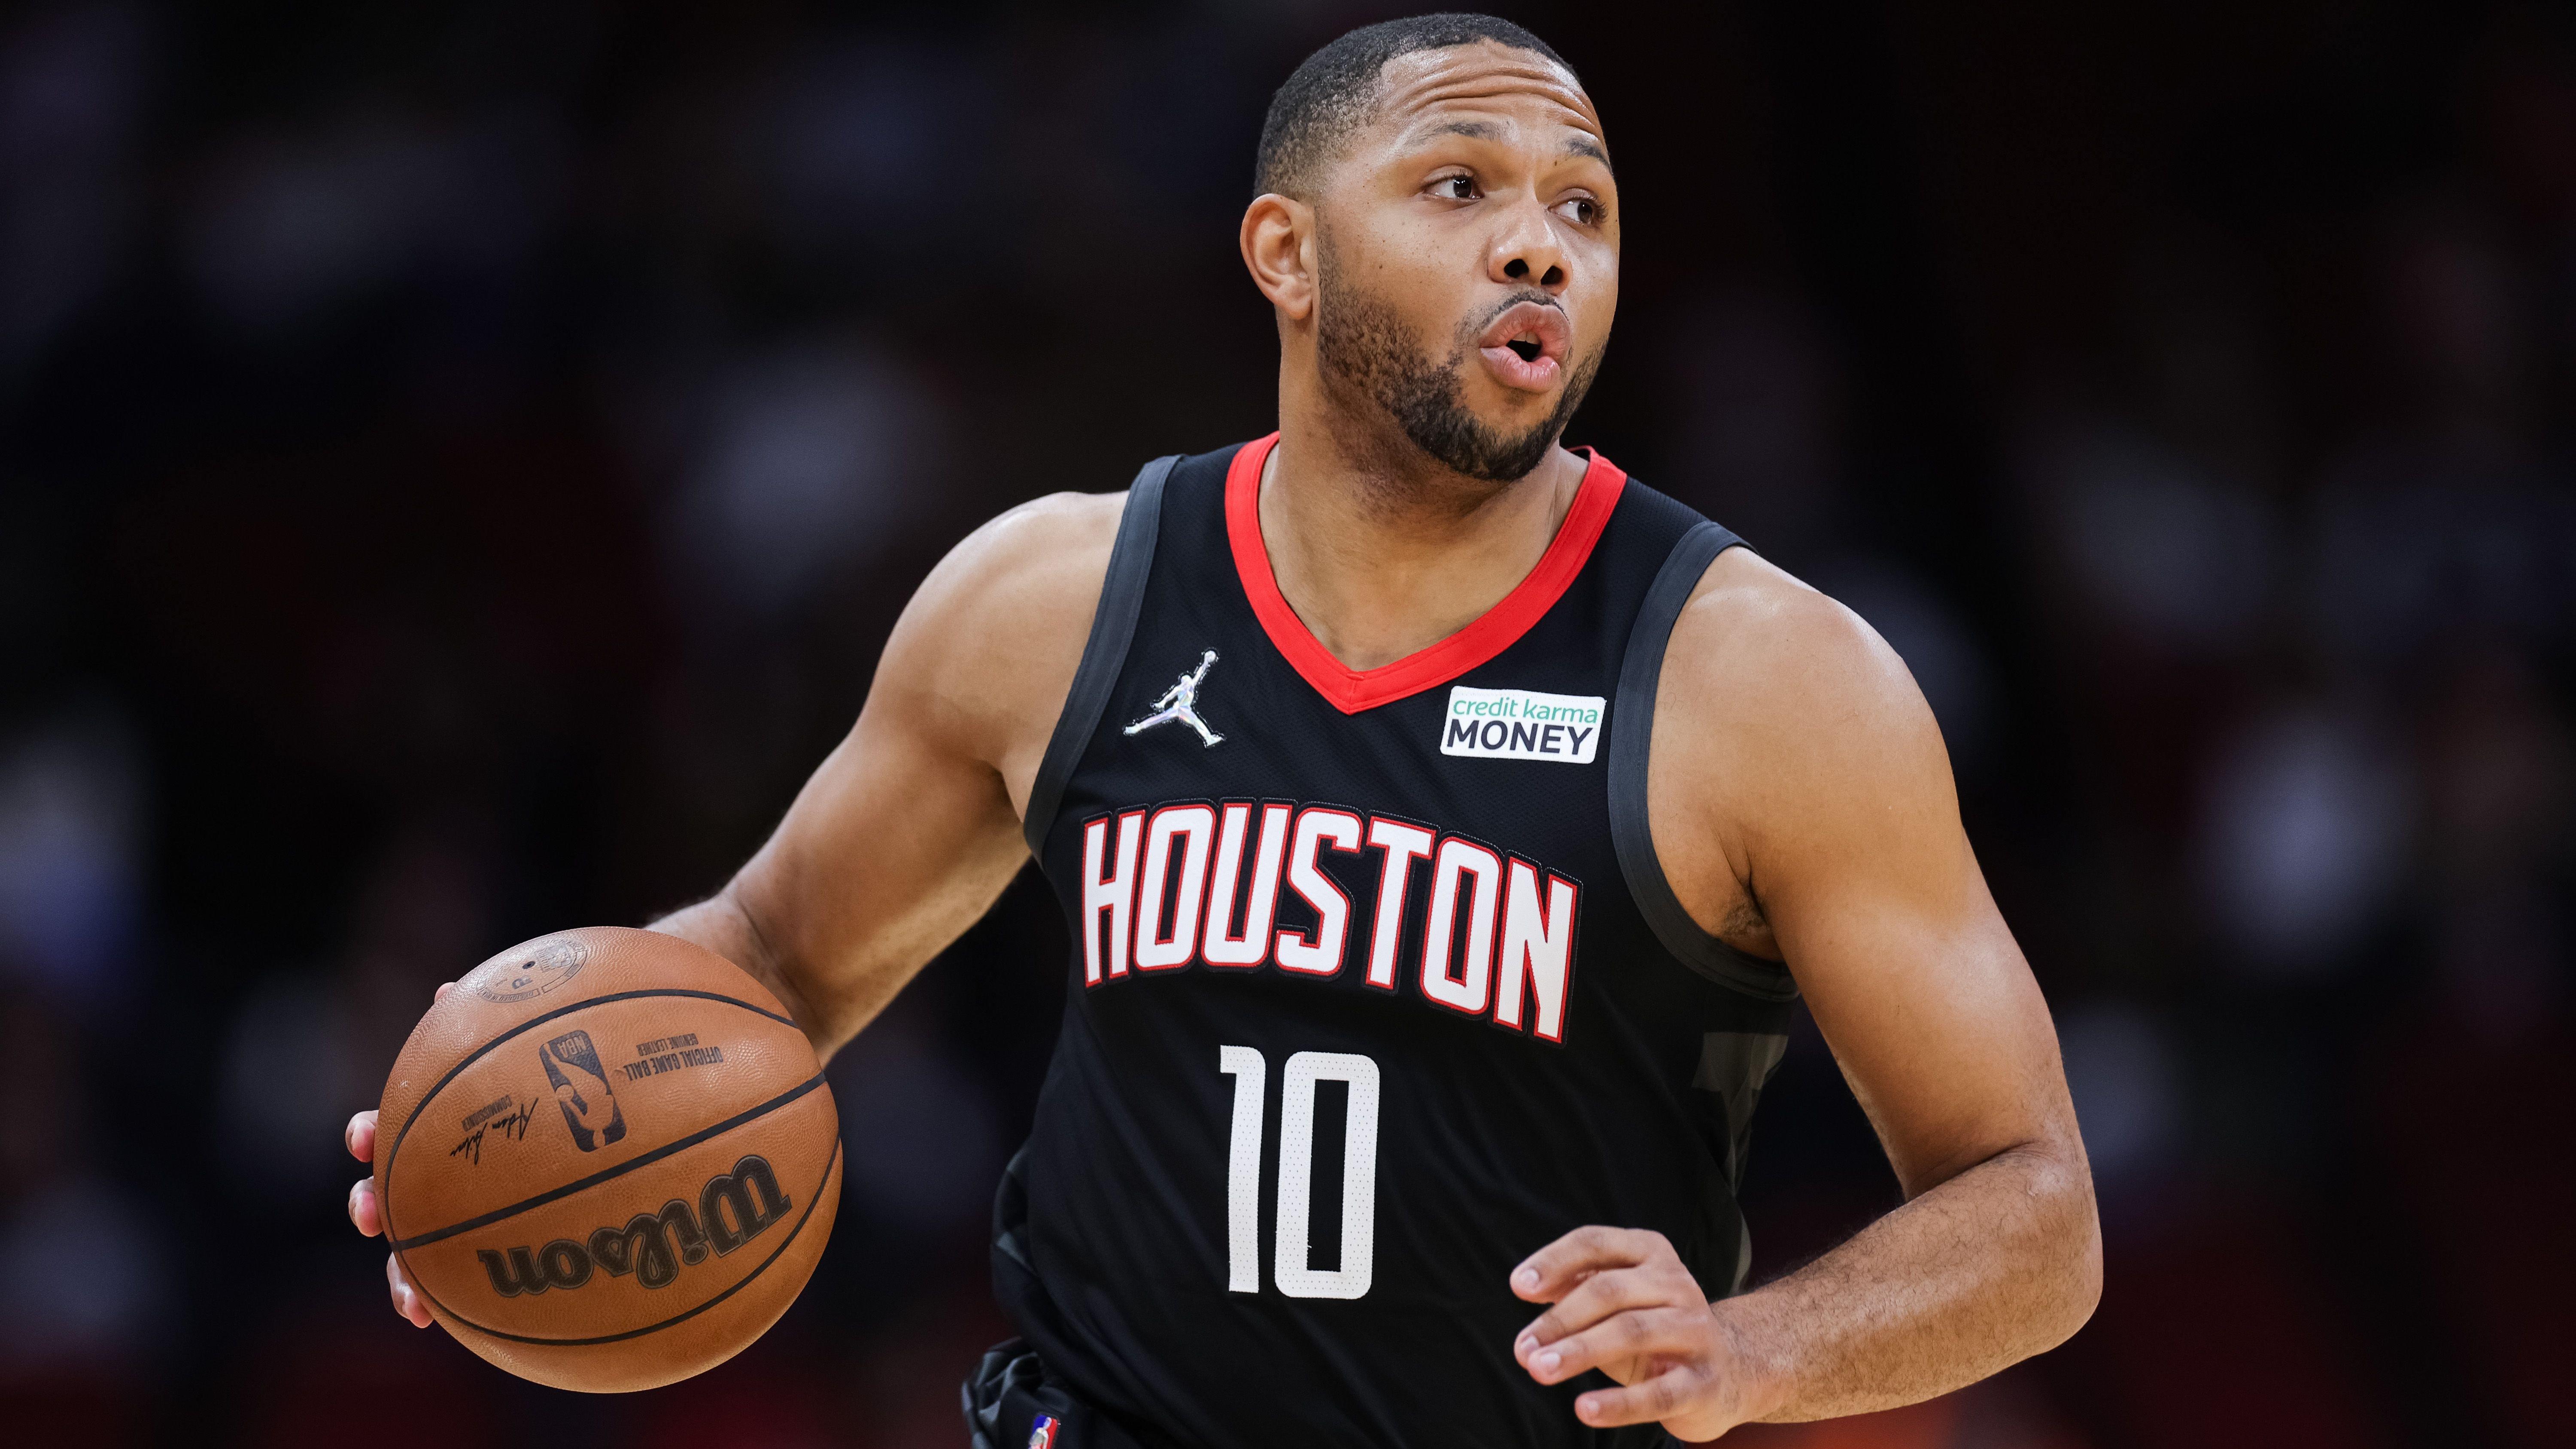 Eric Gordon making plays for the Rockets